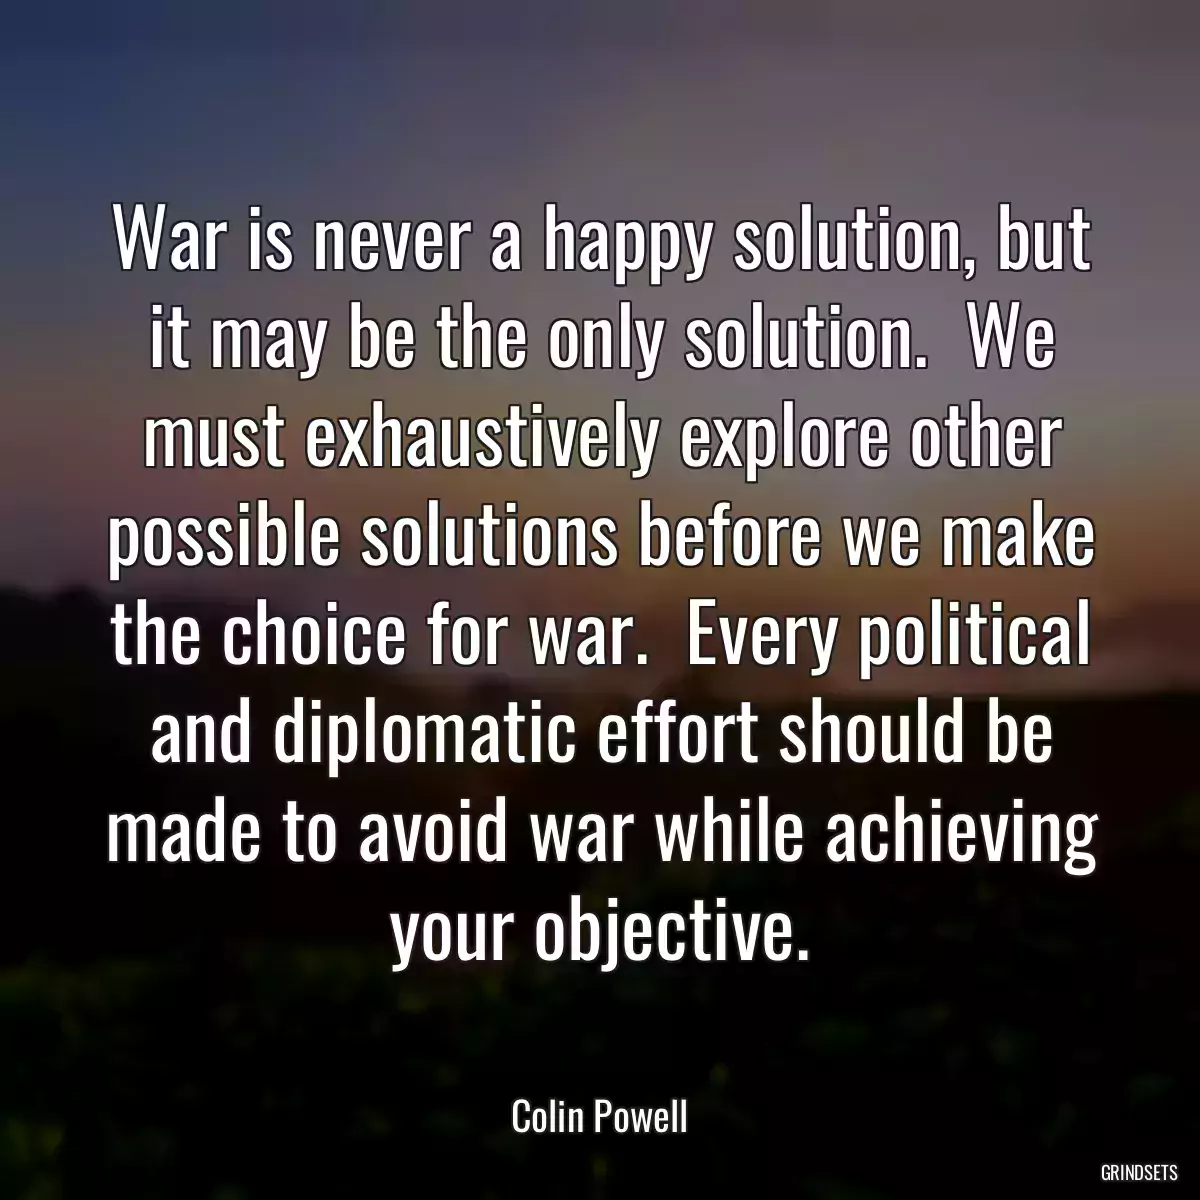 War is never a happy solution, but it may be the only solution.  We must exhaustively explore other possible solutions before we make the choice for war.  Every political and diplomatic effort should be made to avoid war while achieving your objective.